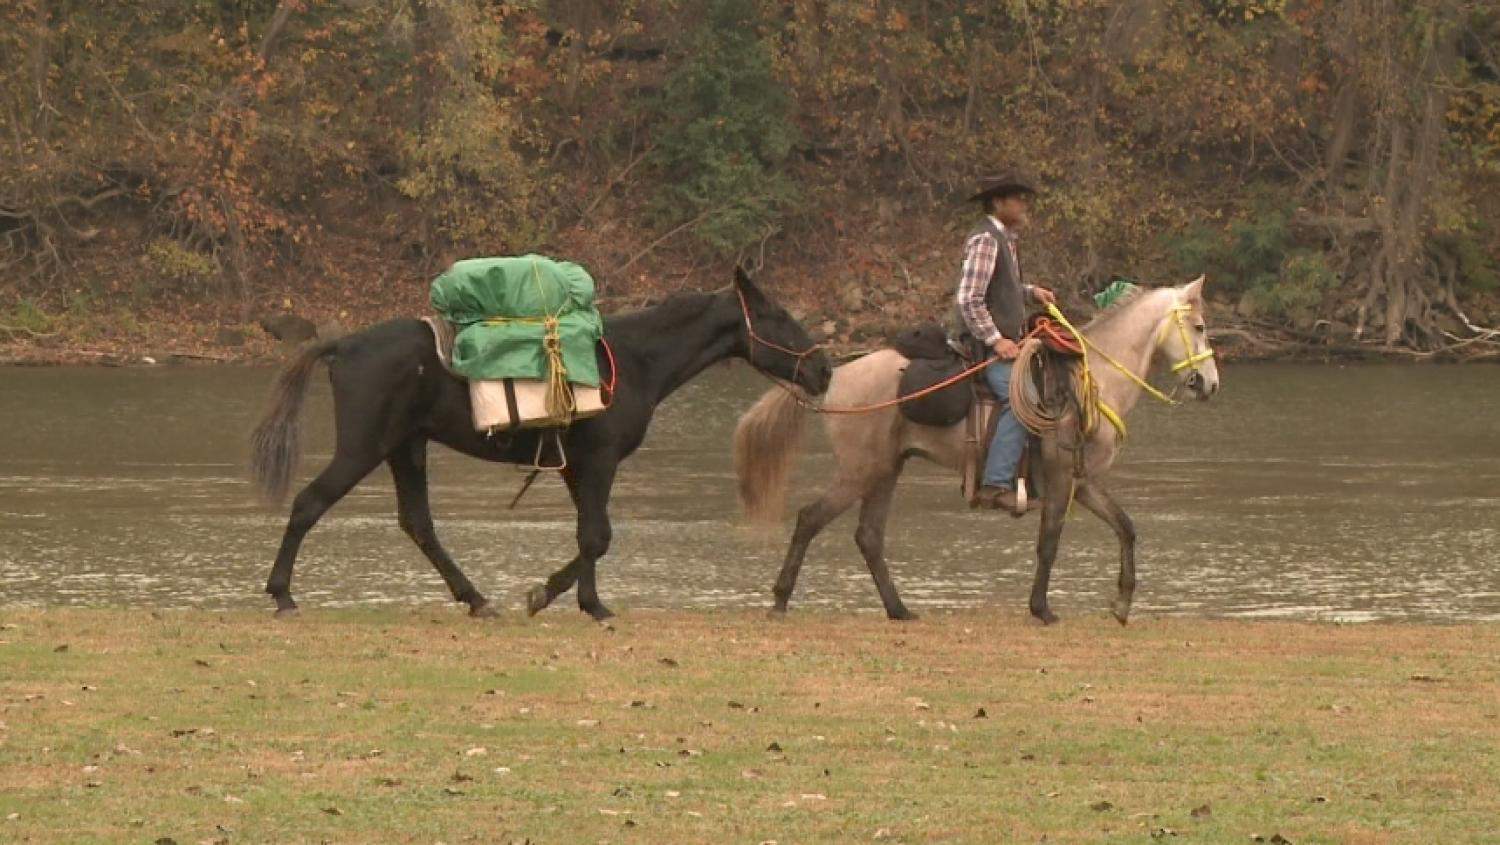 Cowboy riding 400 miles on horseback to raise awareness for cancer in memory of father